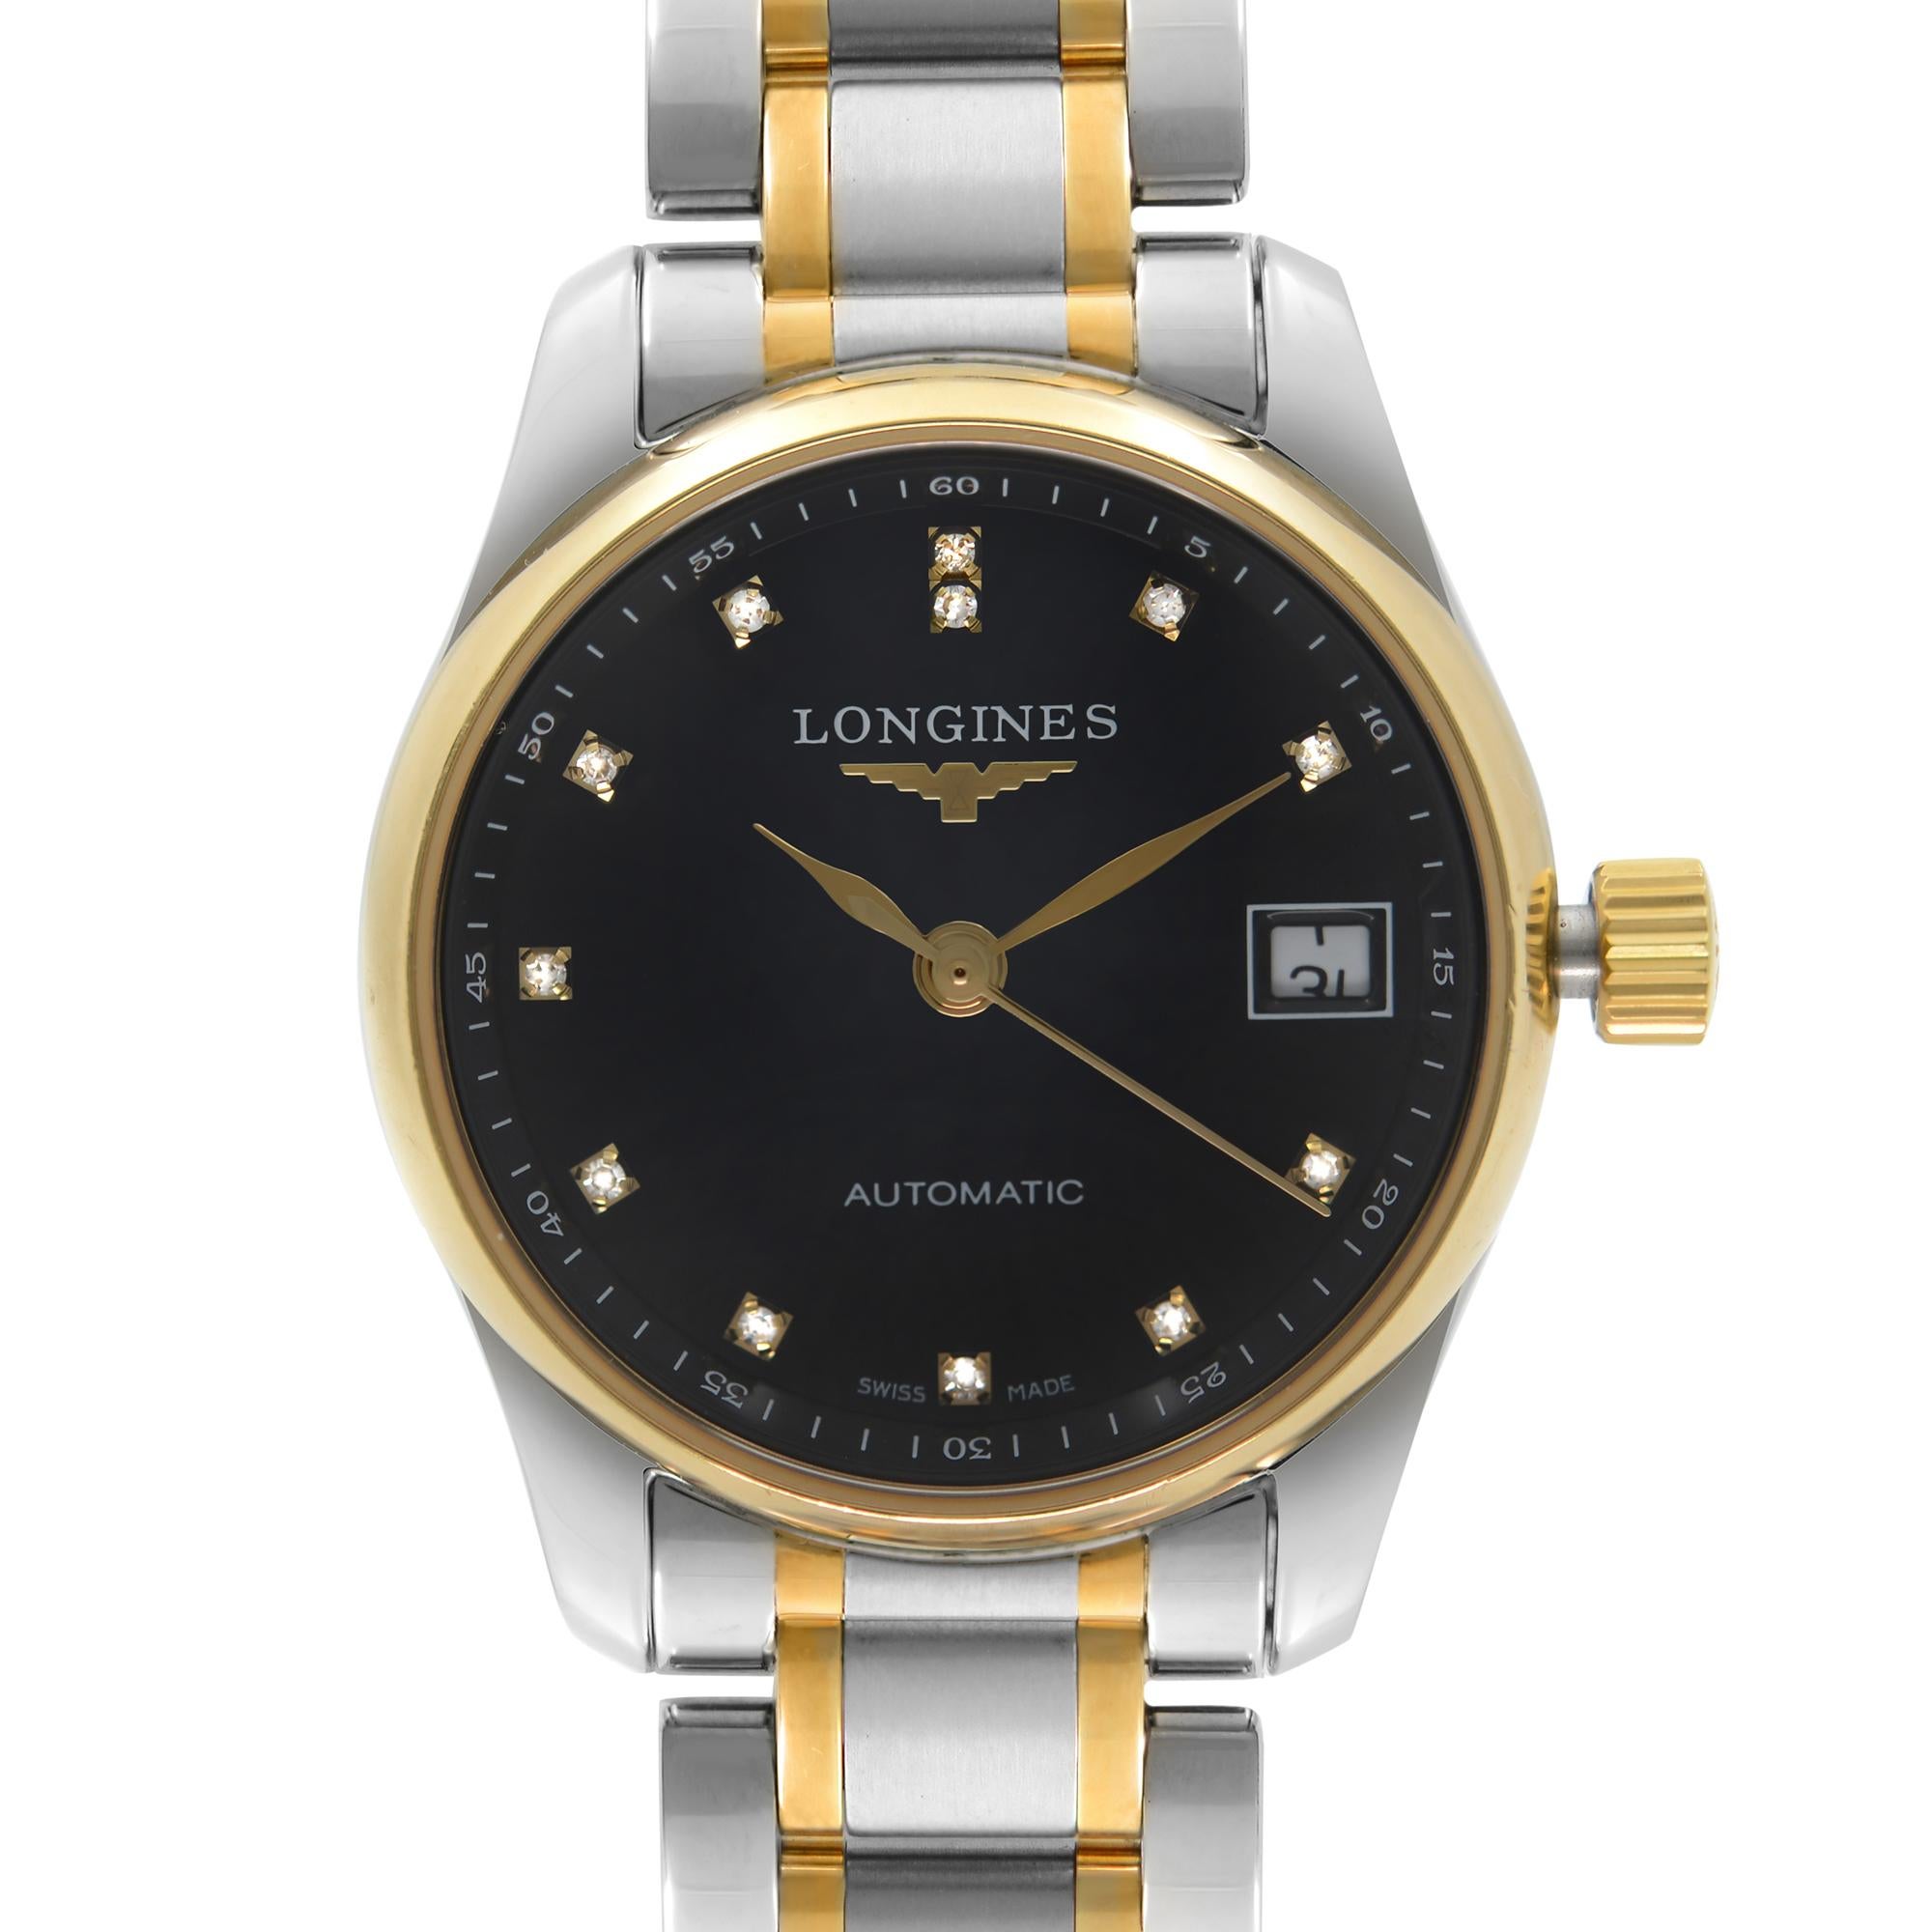 Display Model Longines Master Collection Two-Tone Black Diamond Dial Automatic Ladies Watch L21285577. This Beautiful Timepiece is Powered by Mechanical (Automatic) Movement and Features: Round Stainless Steel Case with a Stainless Steel & Yellow